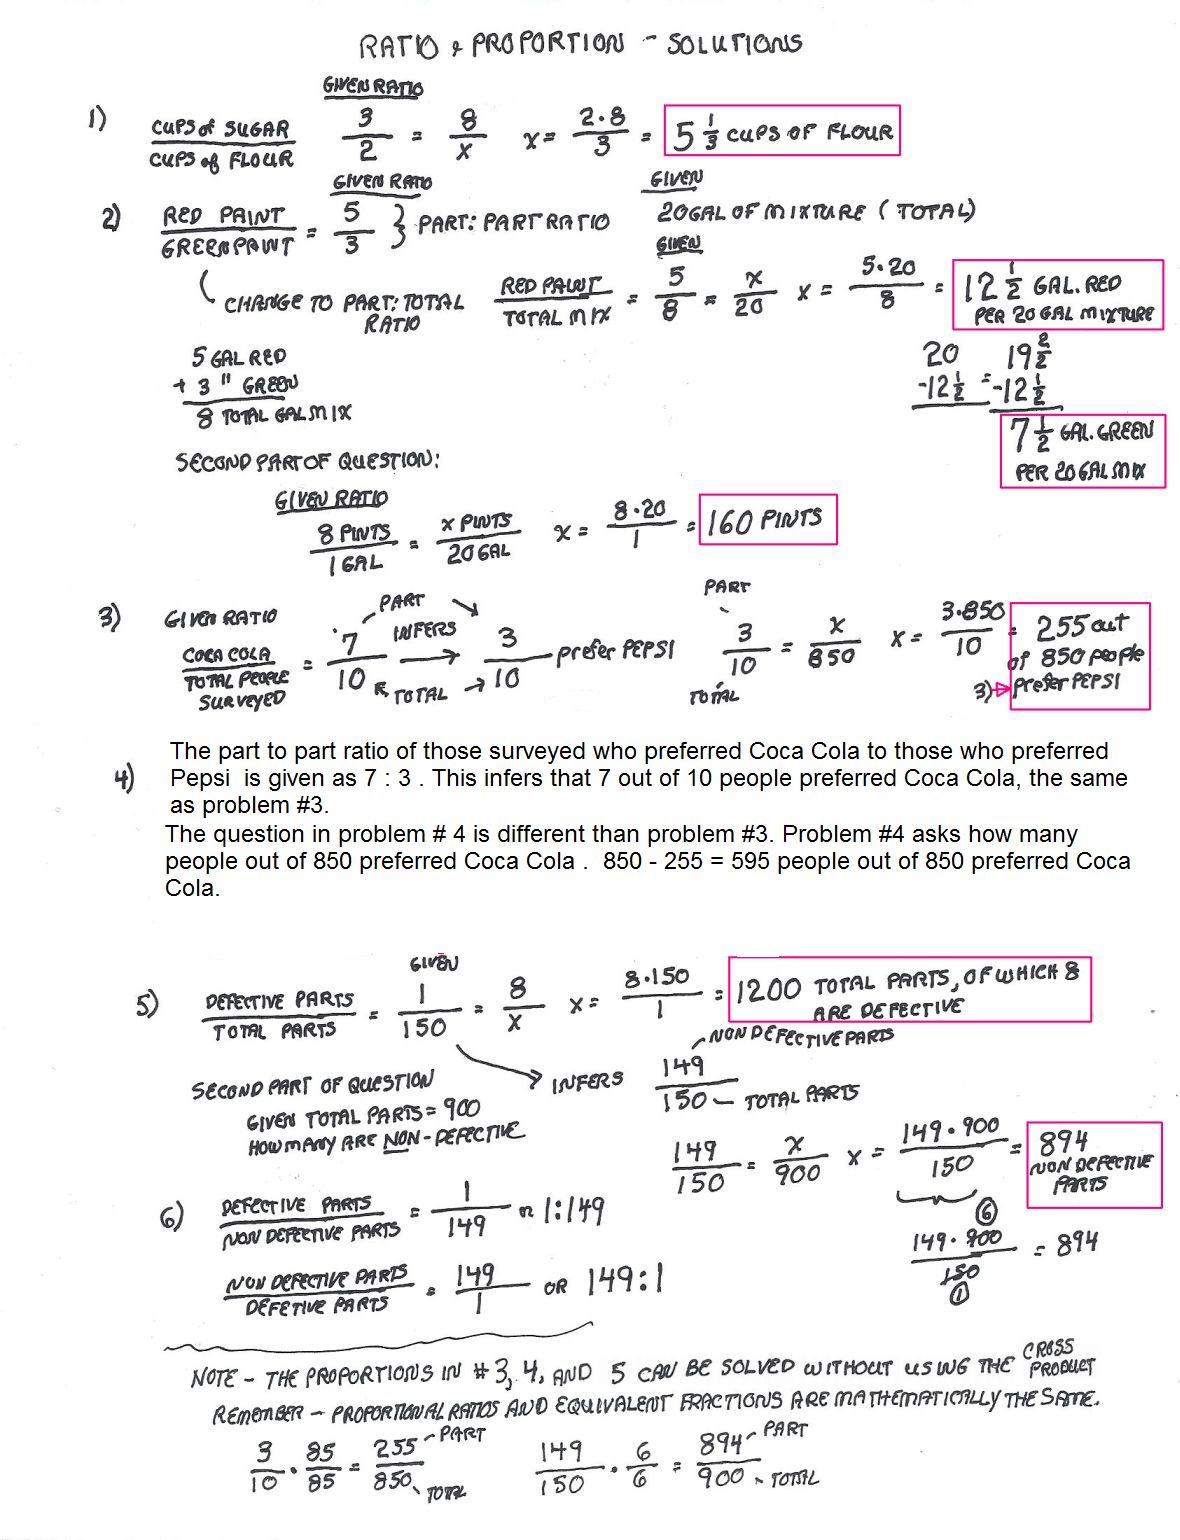 Cobb Adult Ed Math: Ratio and Proportion Solutions to Worksheet